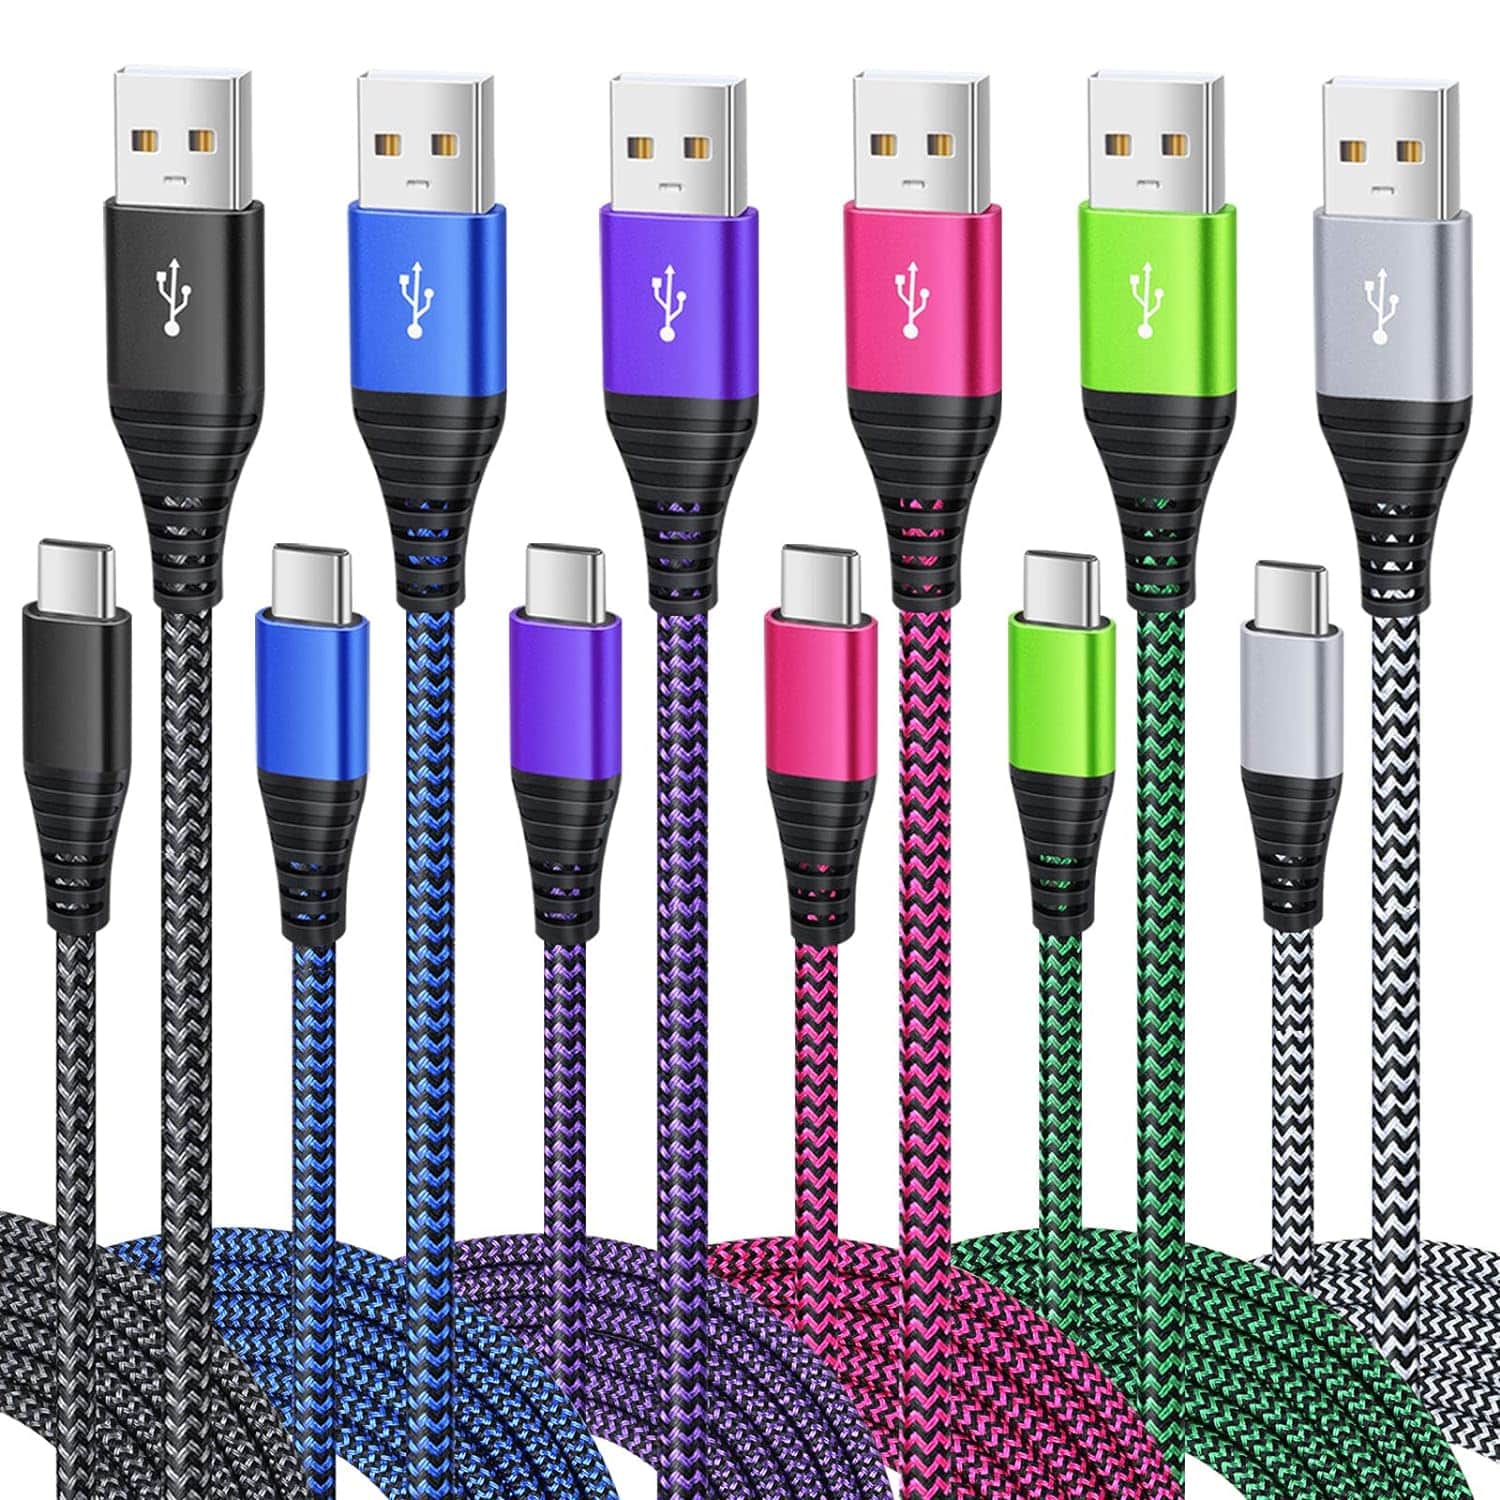 Besgoods USB Type C Charger Cable: Fast Charging and Durability in Vibrant Colors